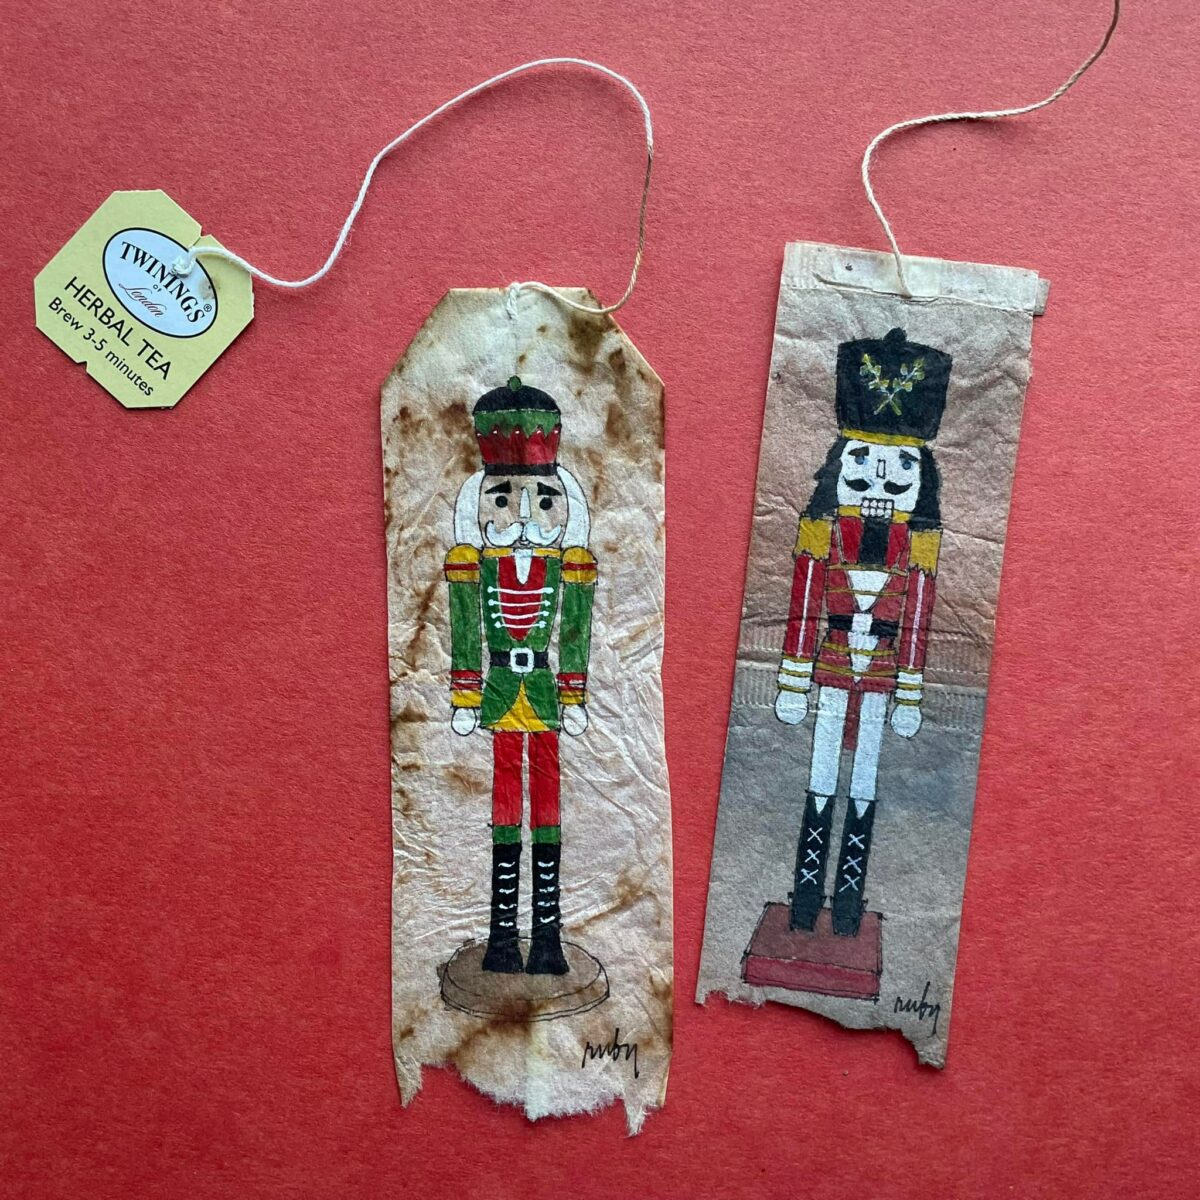 Gorgeous Miniature Watercolors Painted On Used Teabags By Ruby Silvious (5)